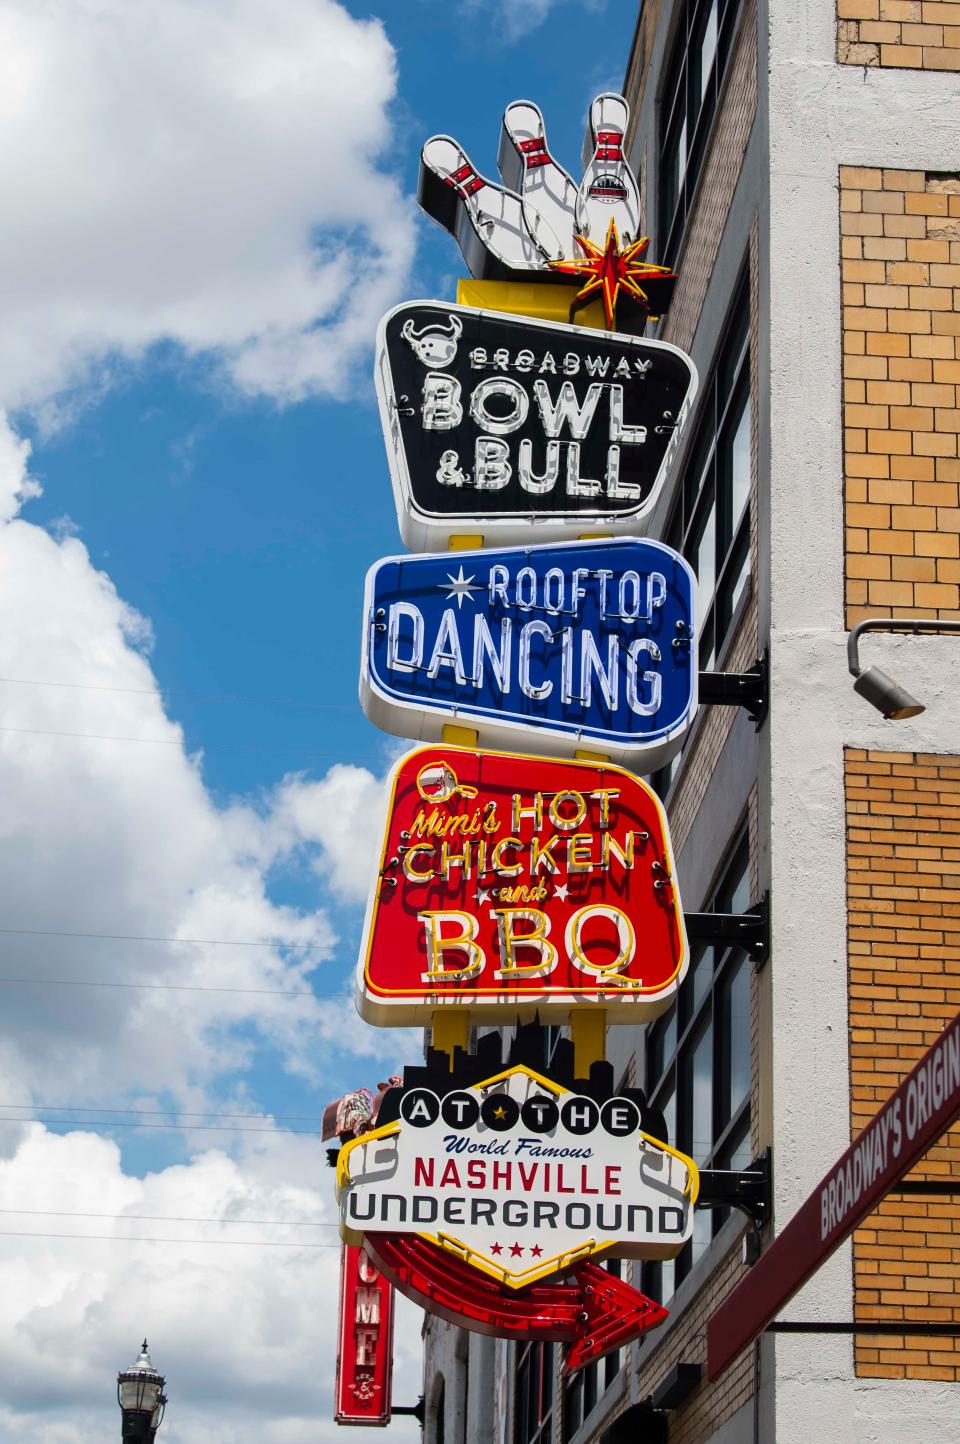 Nashville Underground Honky Tonk is adding new arcades including a bowling ally in Nashville, Tenn., Wednesday, June 30, 2021.  